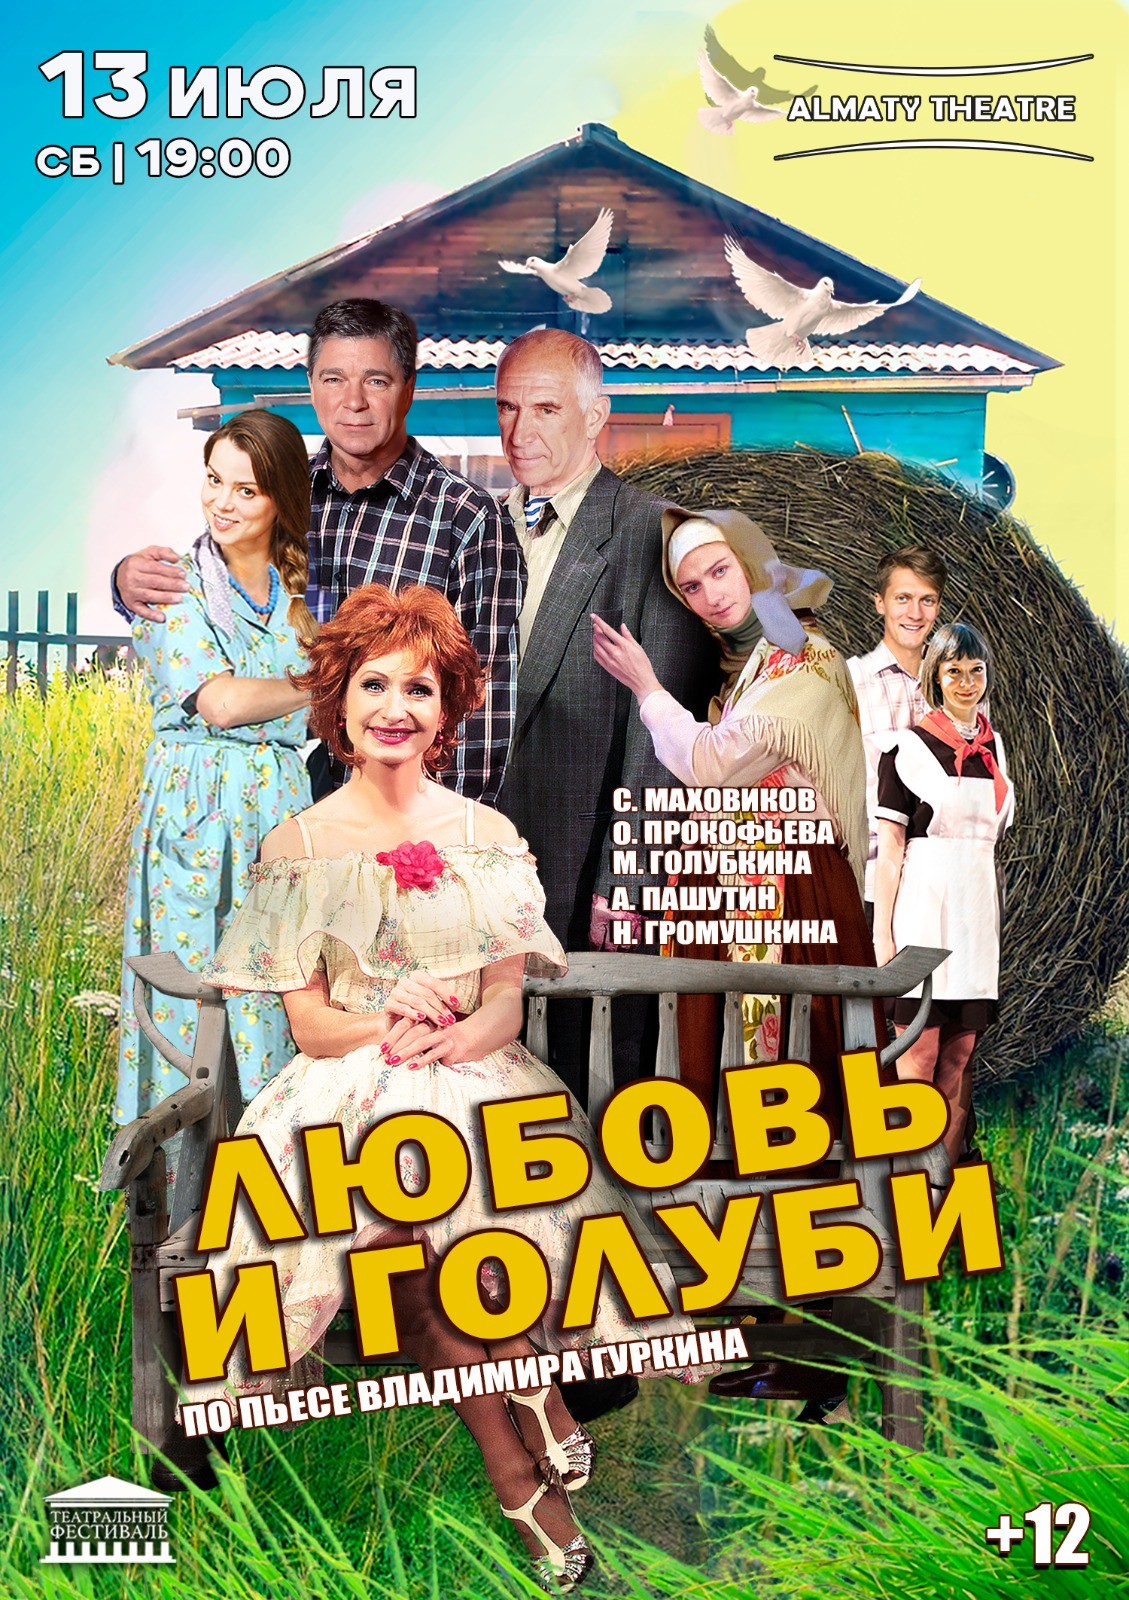 The play «Love and doves» in Almaty